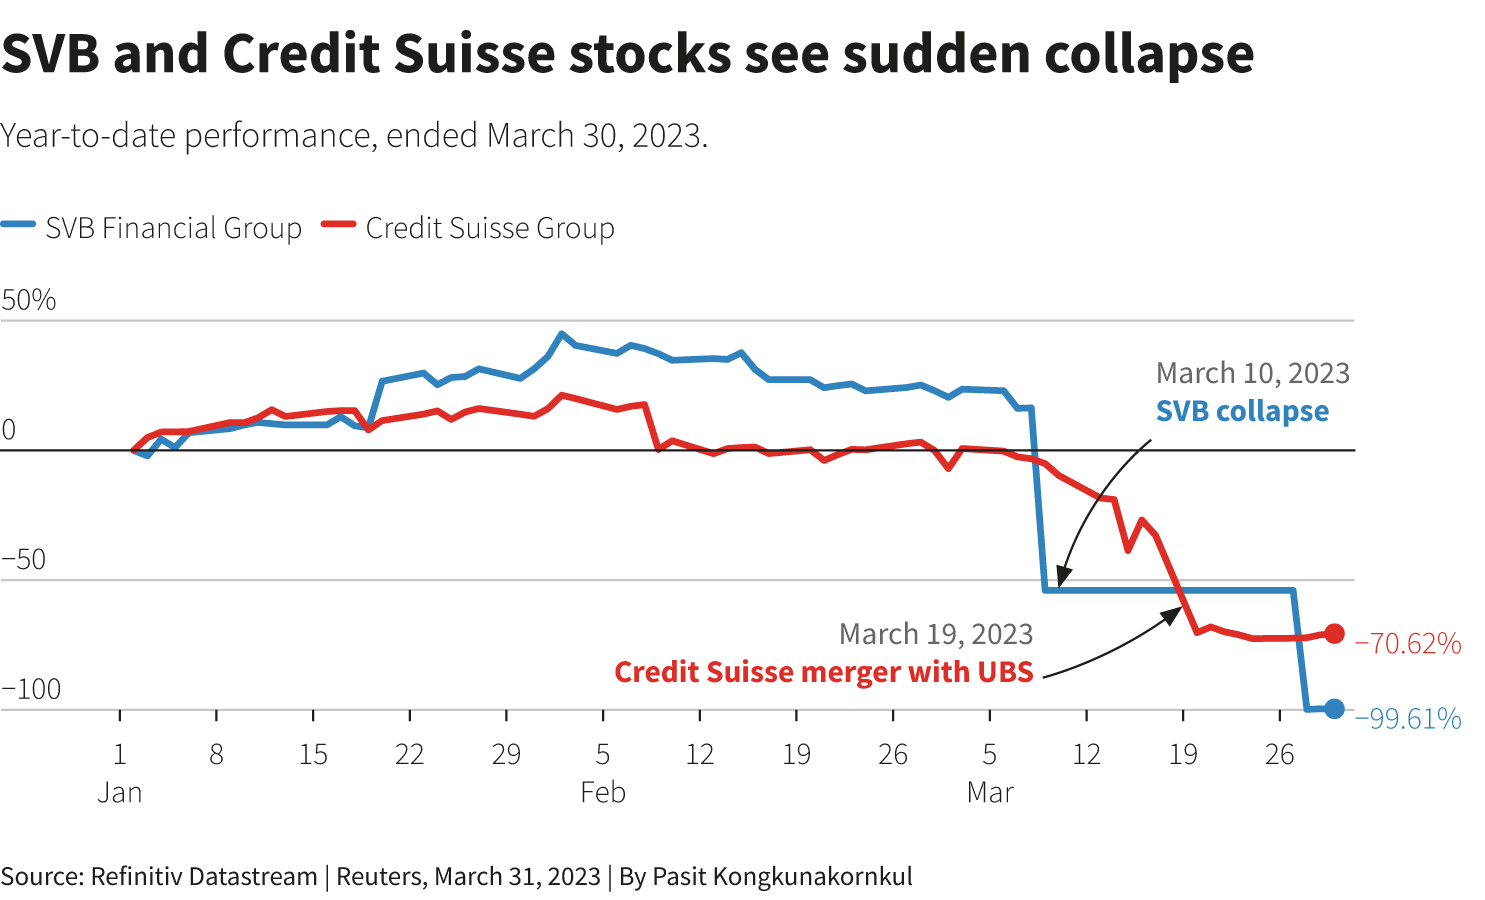 SVB and Credit Suisse stocks see sudden collapse